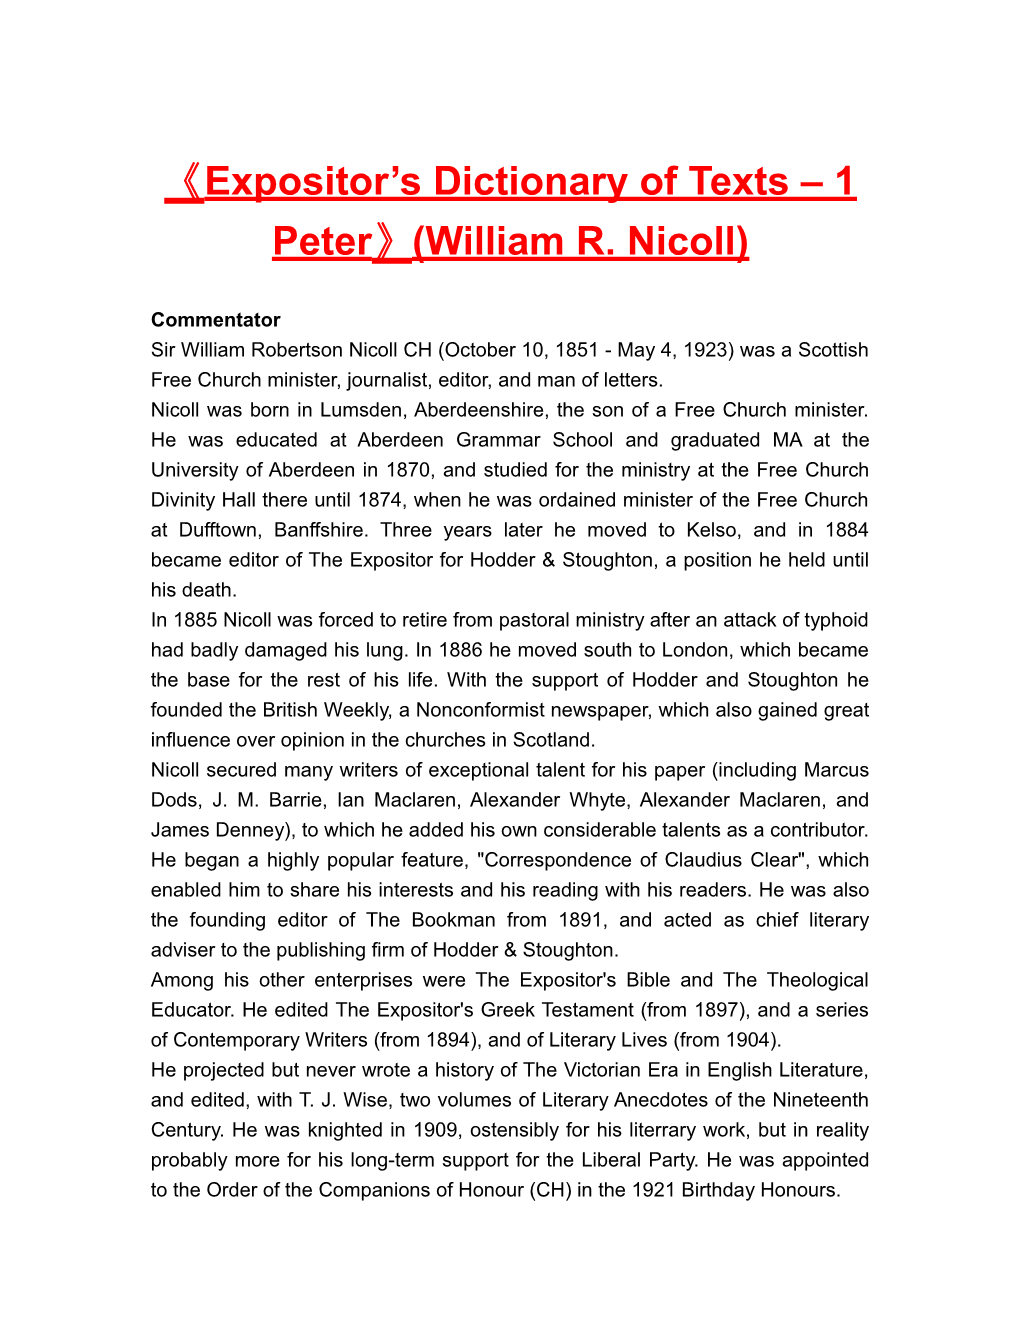 Expositor S Dictionary of Texts 1 Peter (William R. Nicoll)